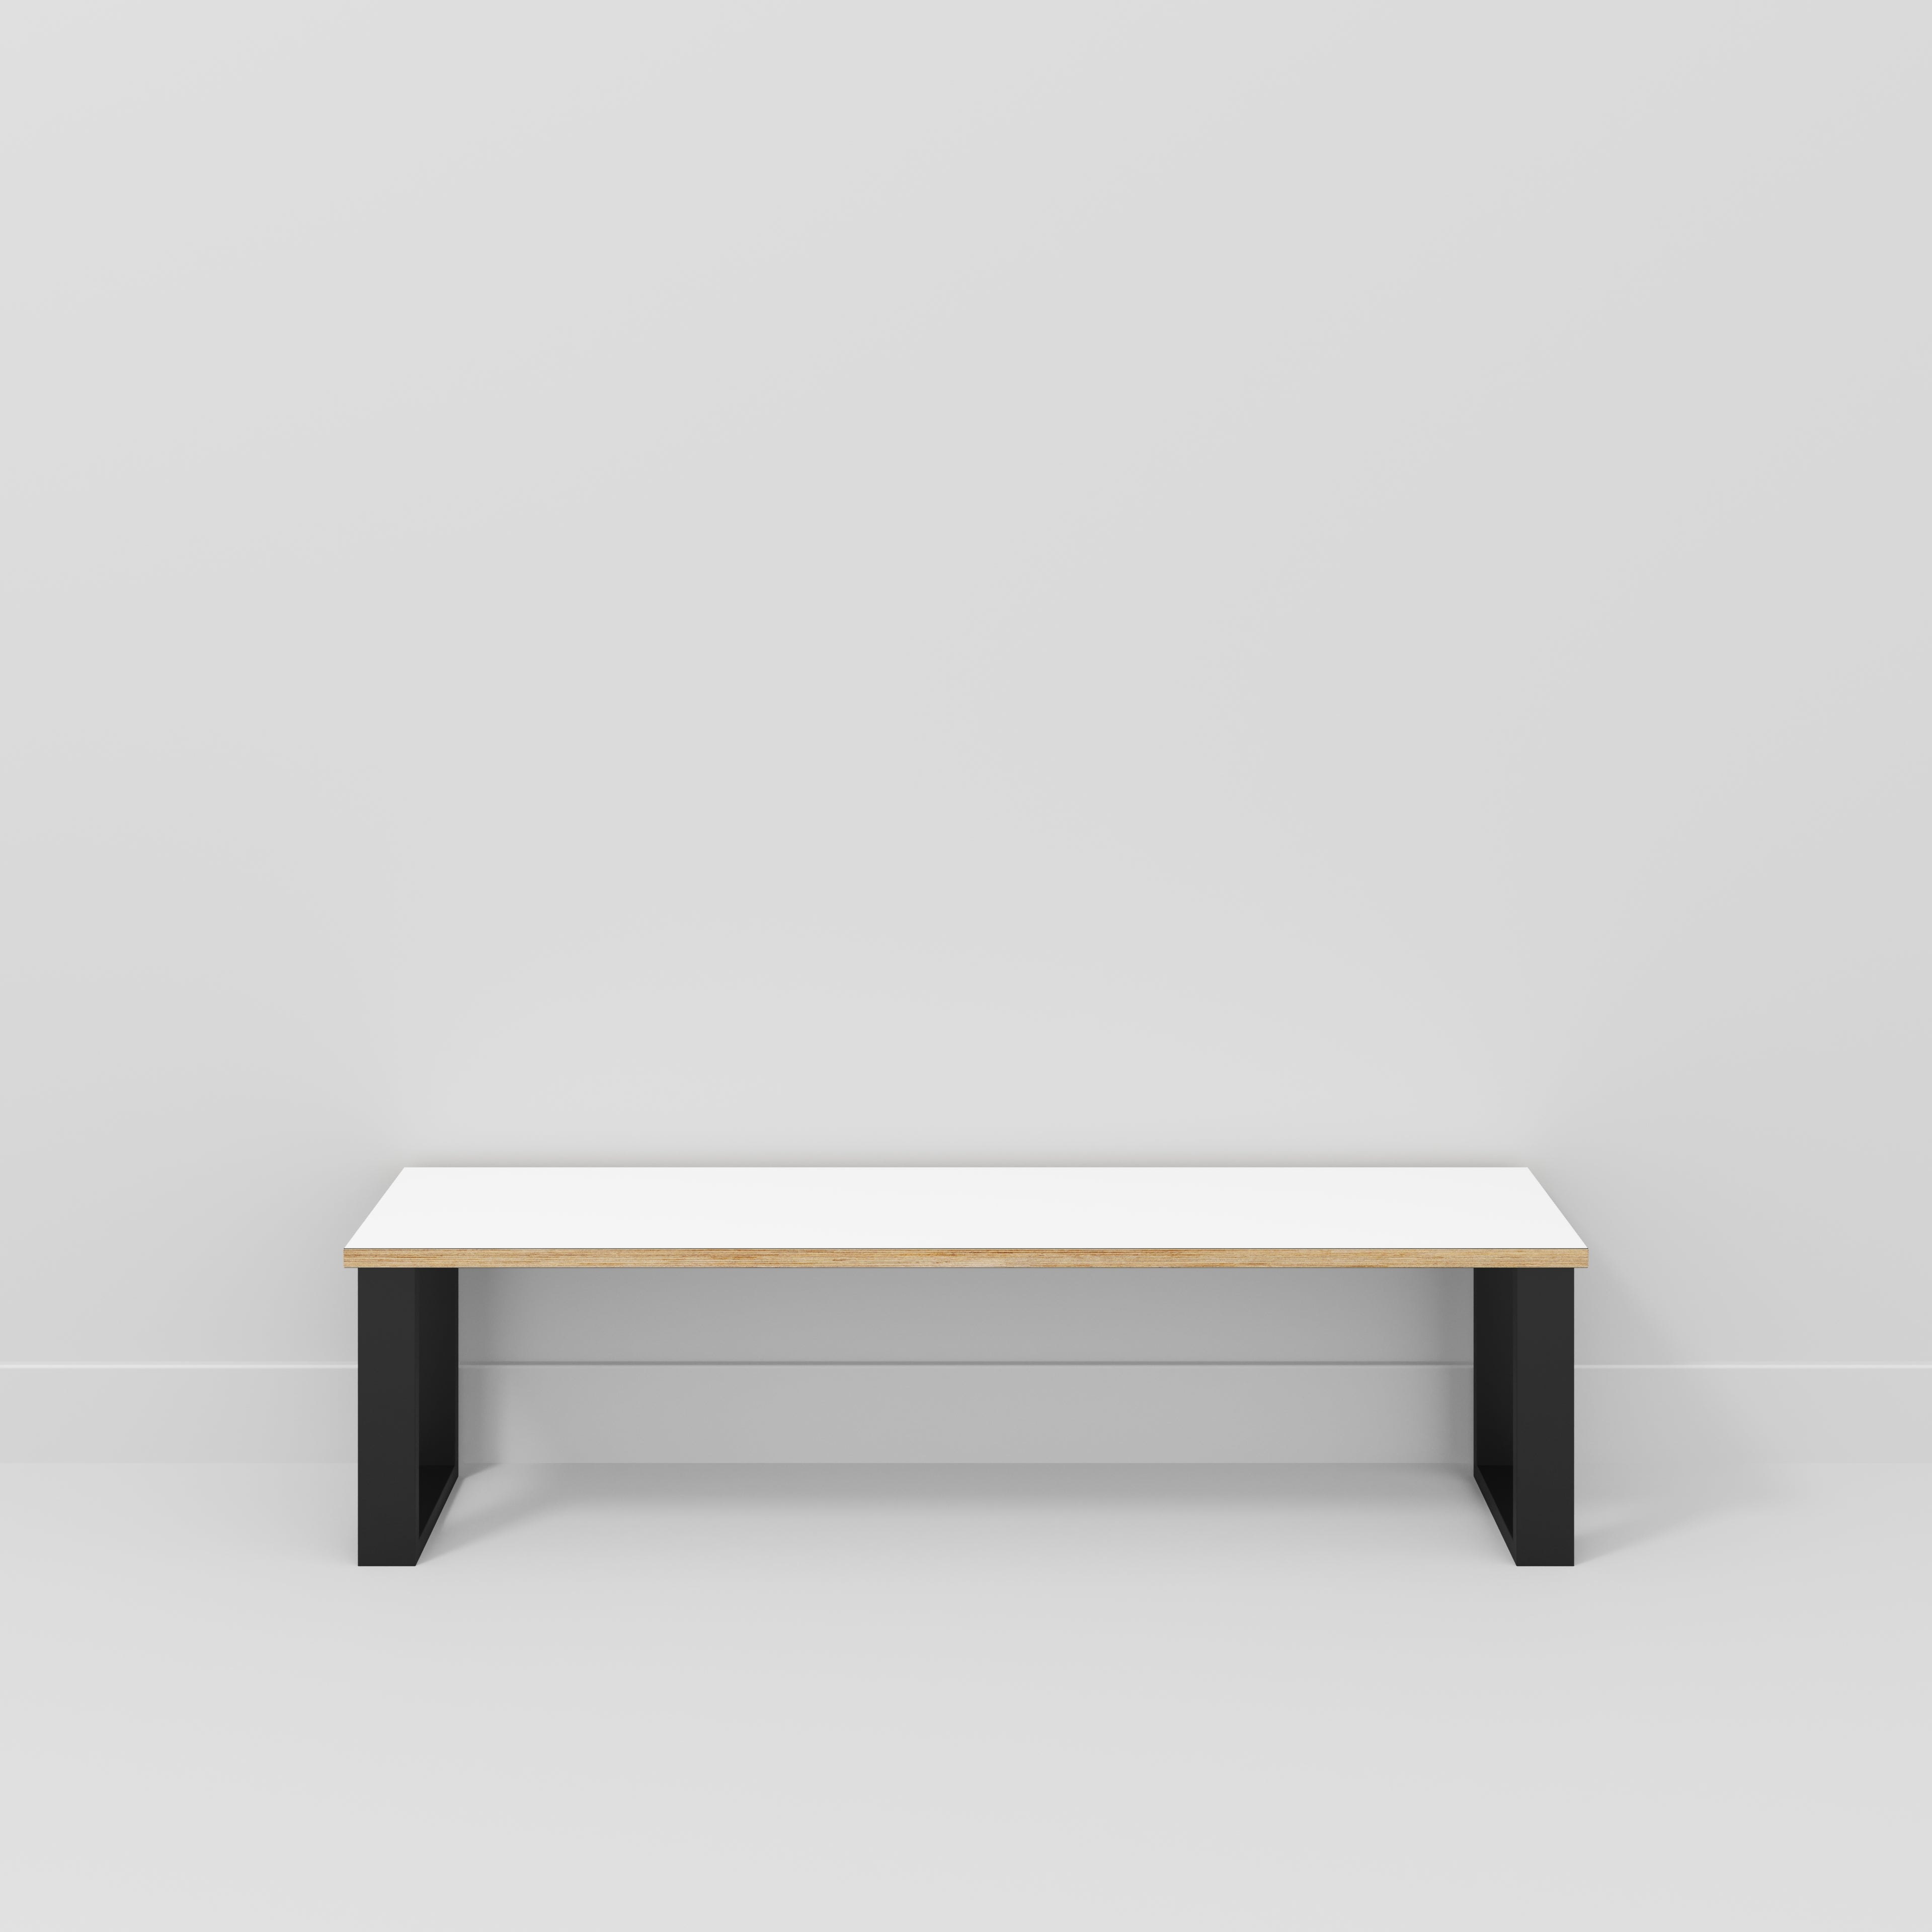 Bench Seat with Black Industrial Legs - Formica White - 1600(w) x 400(d)